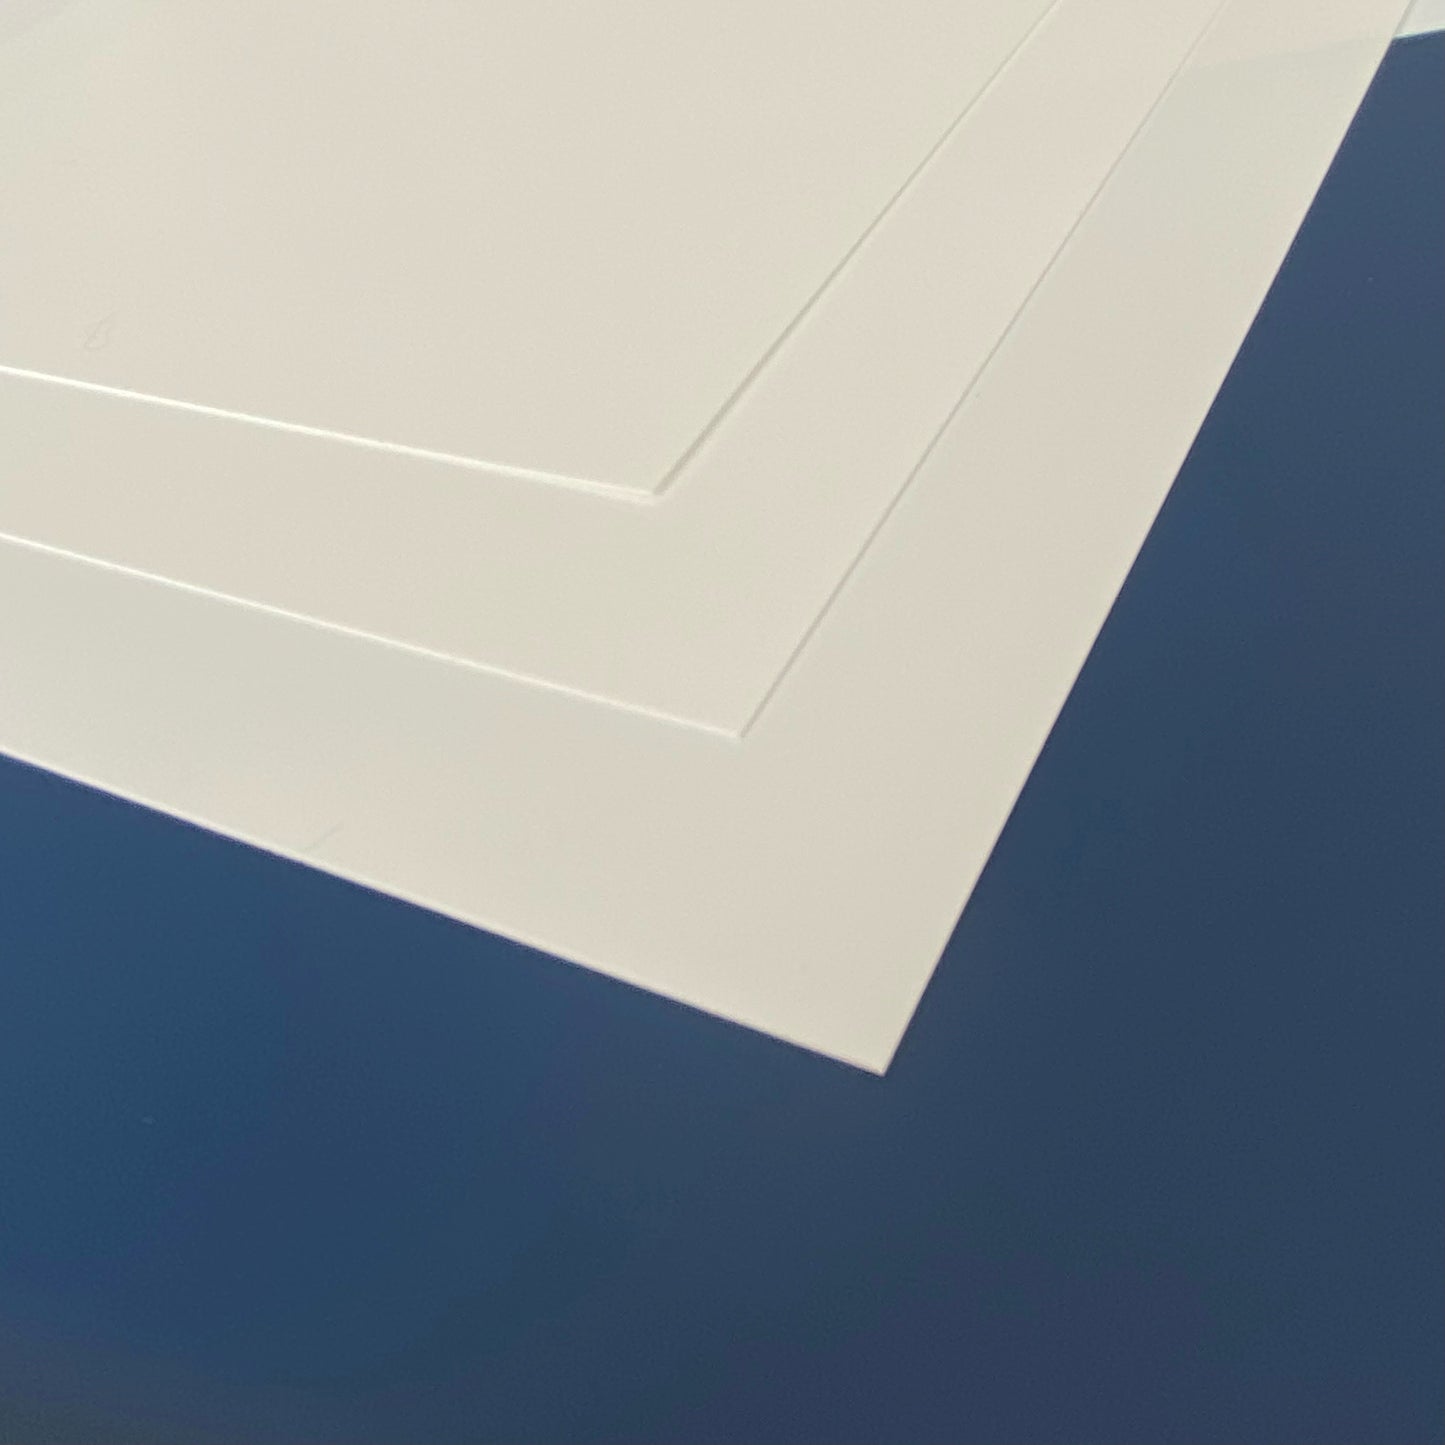 Plastic Polypropylene Sheets A5, A4, A3 & A2 0.8mm thick, White and Clear